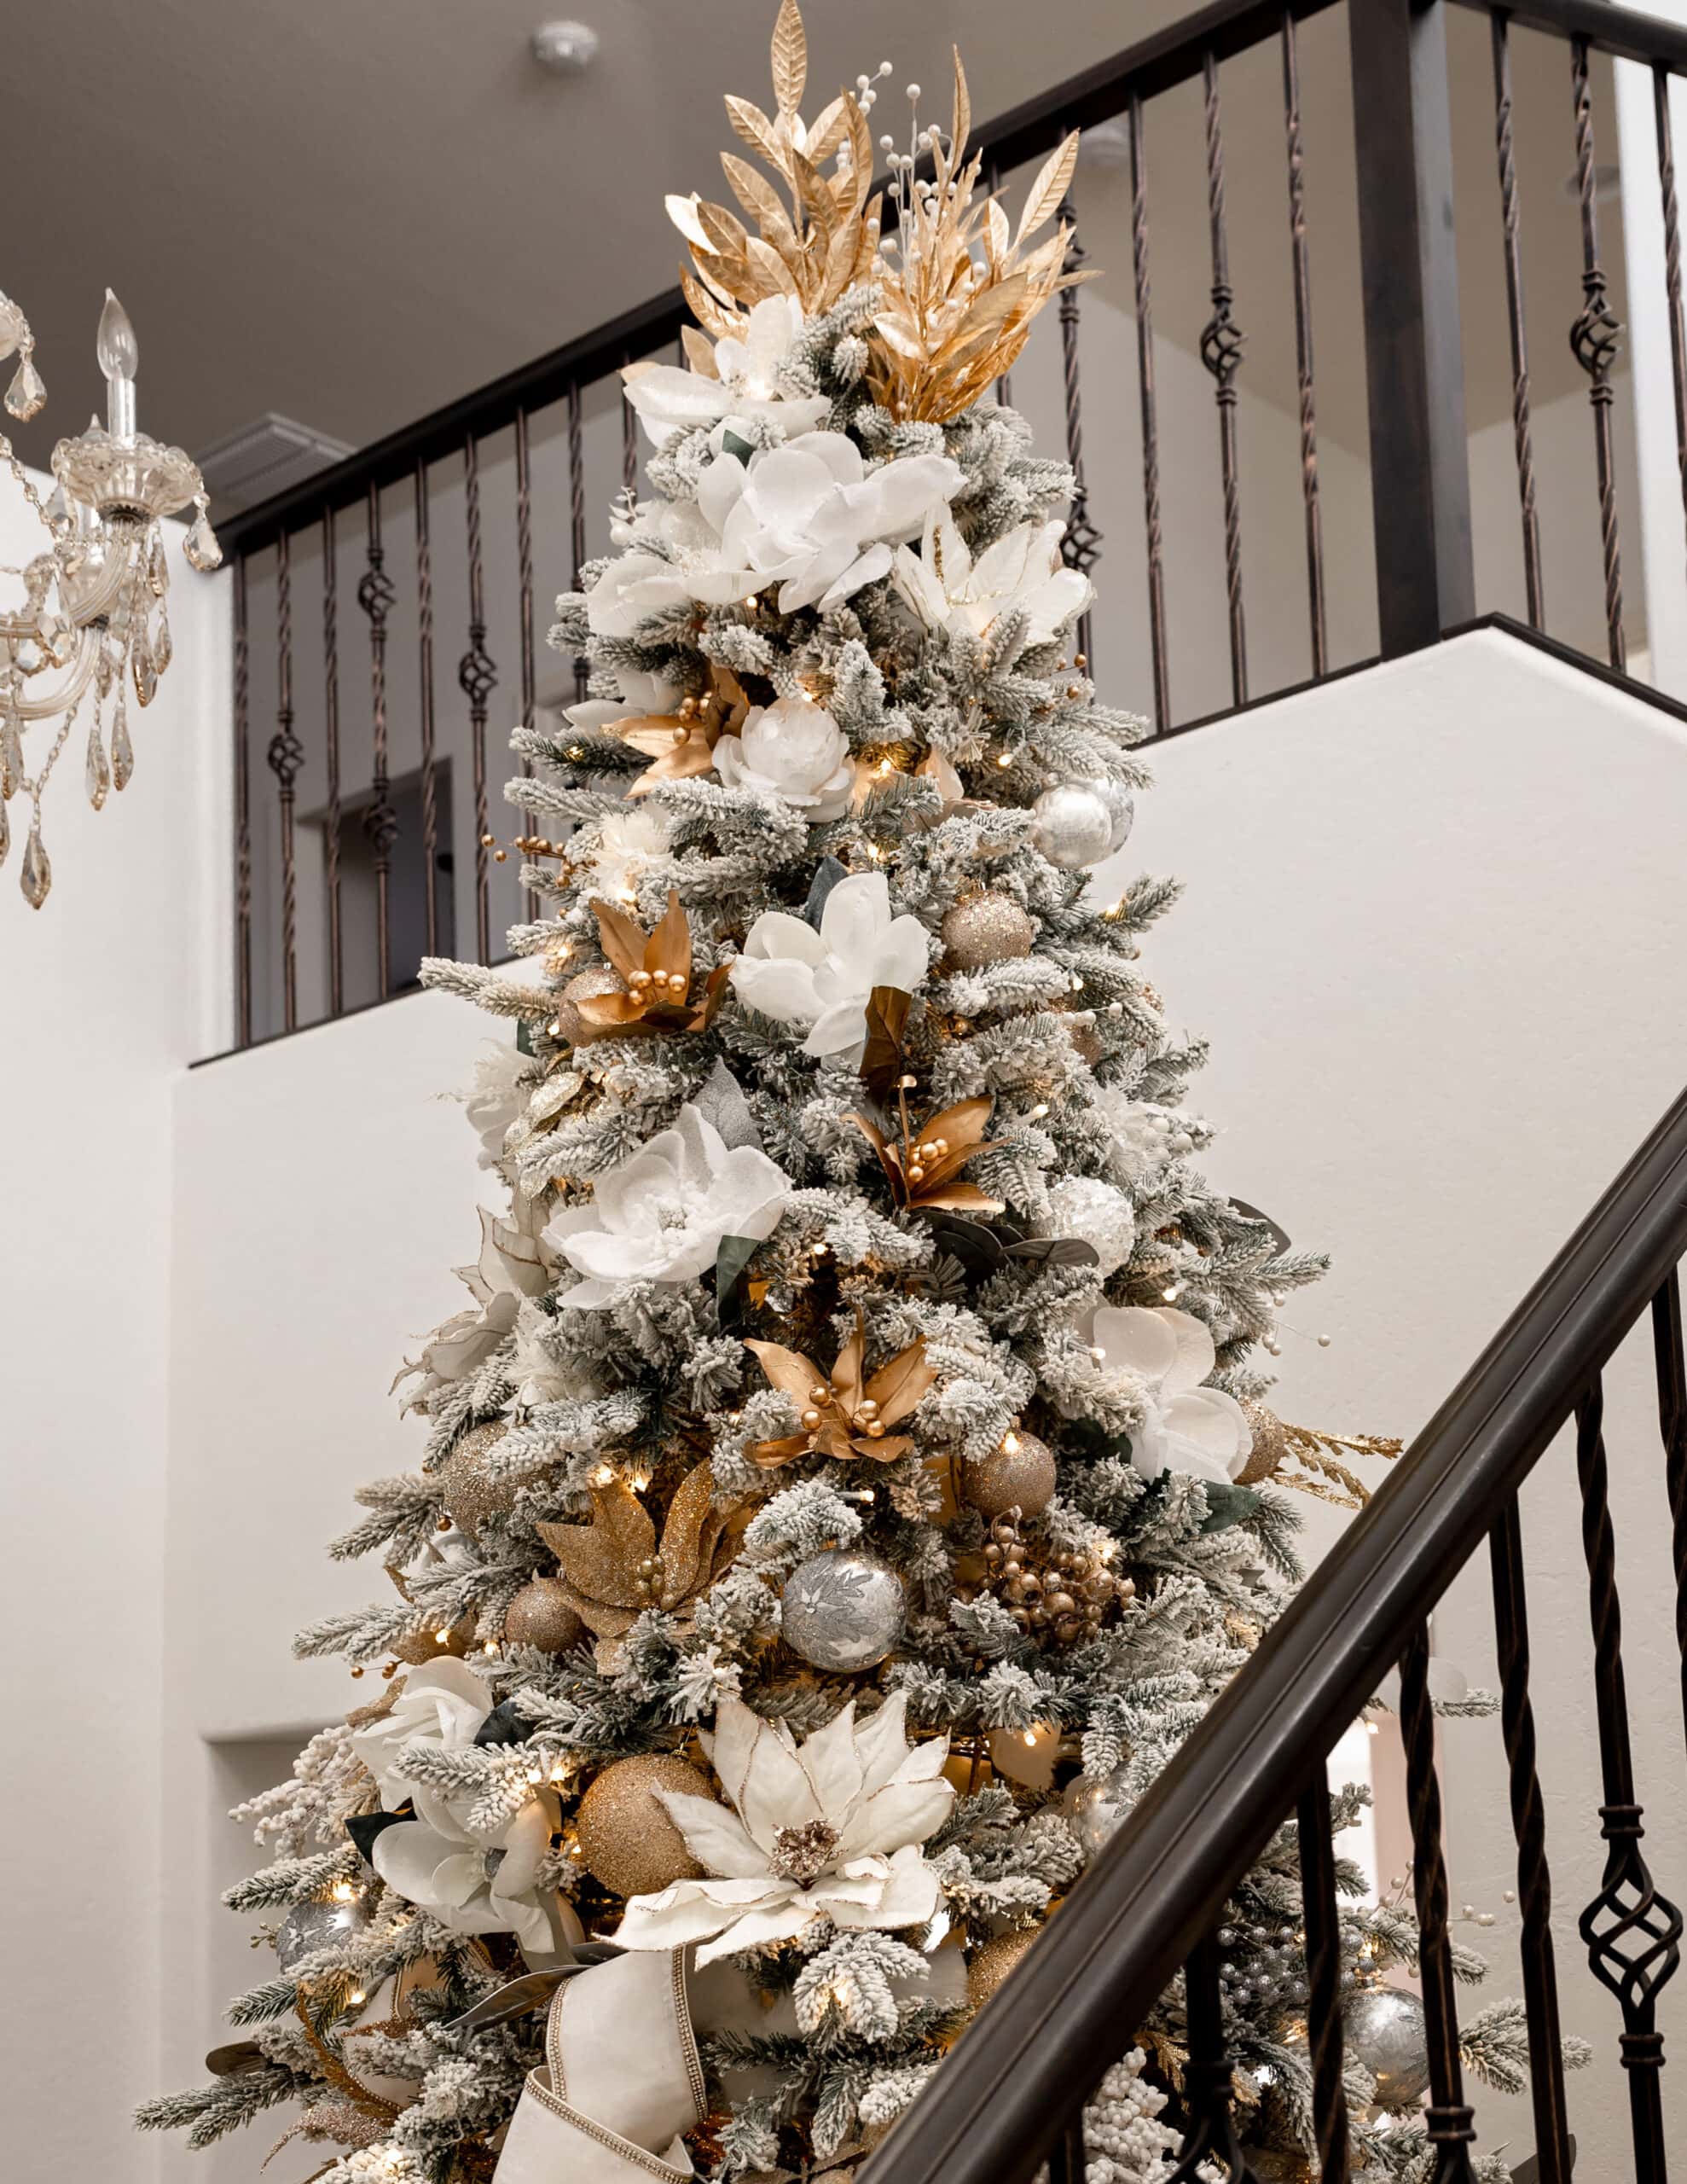 A close up of a 12 foot christmas tree with white and gold florals throughout, and a silver chandelier next to the top of the tree.